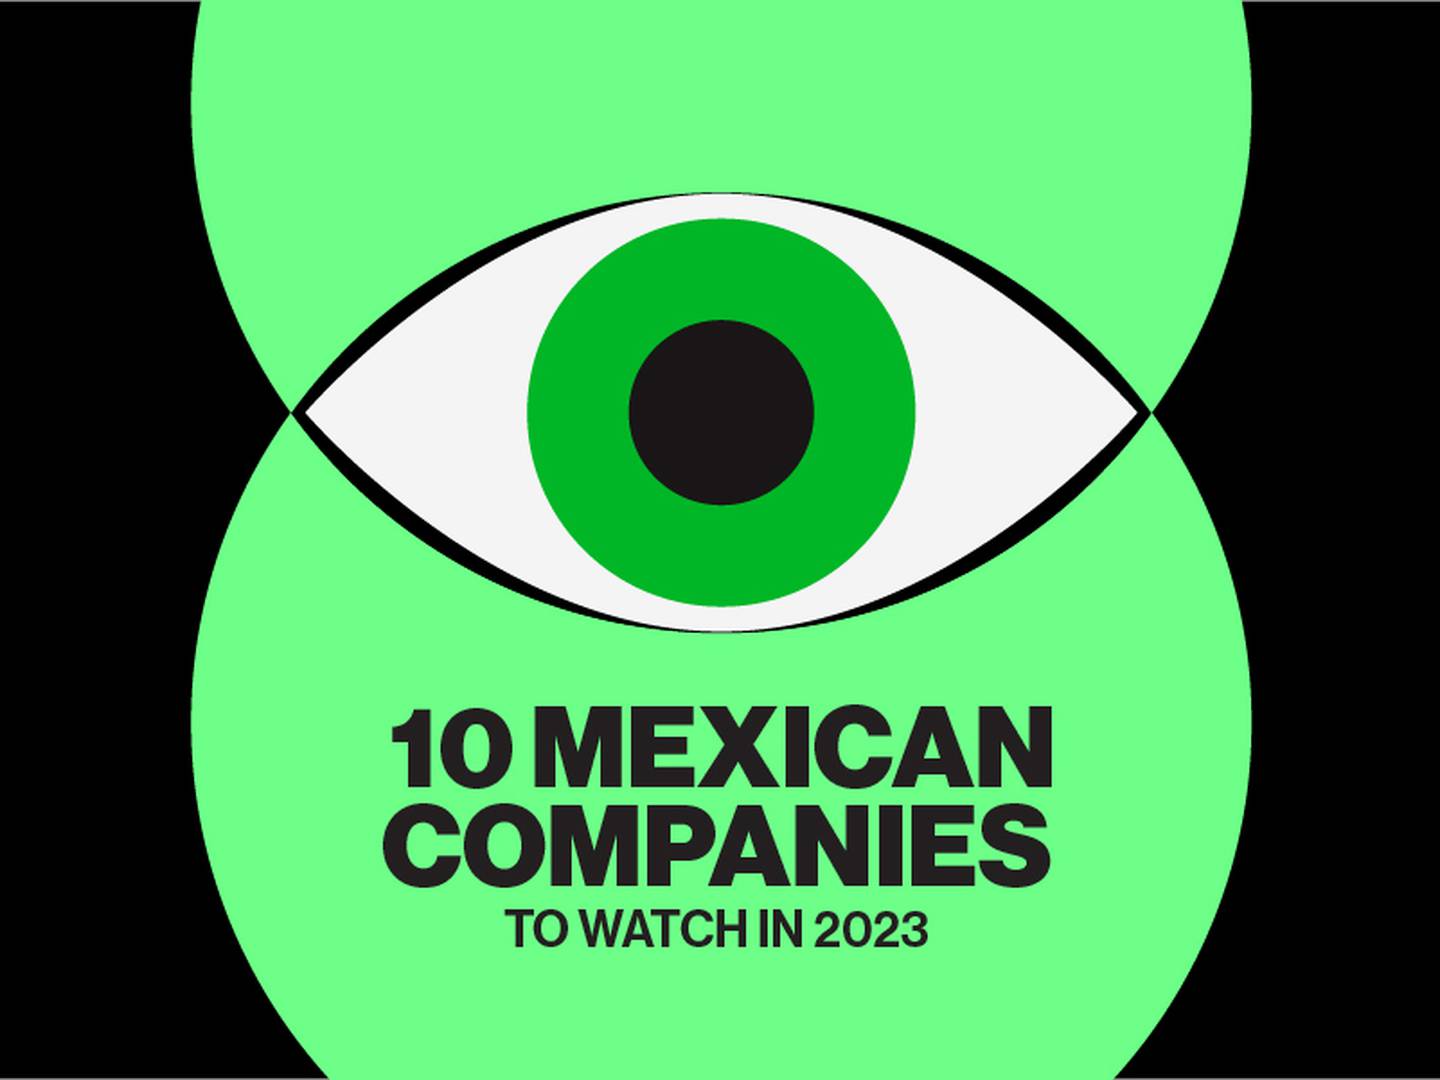 10 Mexican companies to watch in 2023